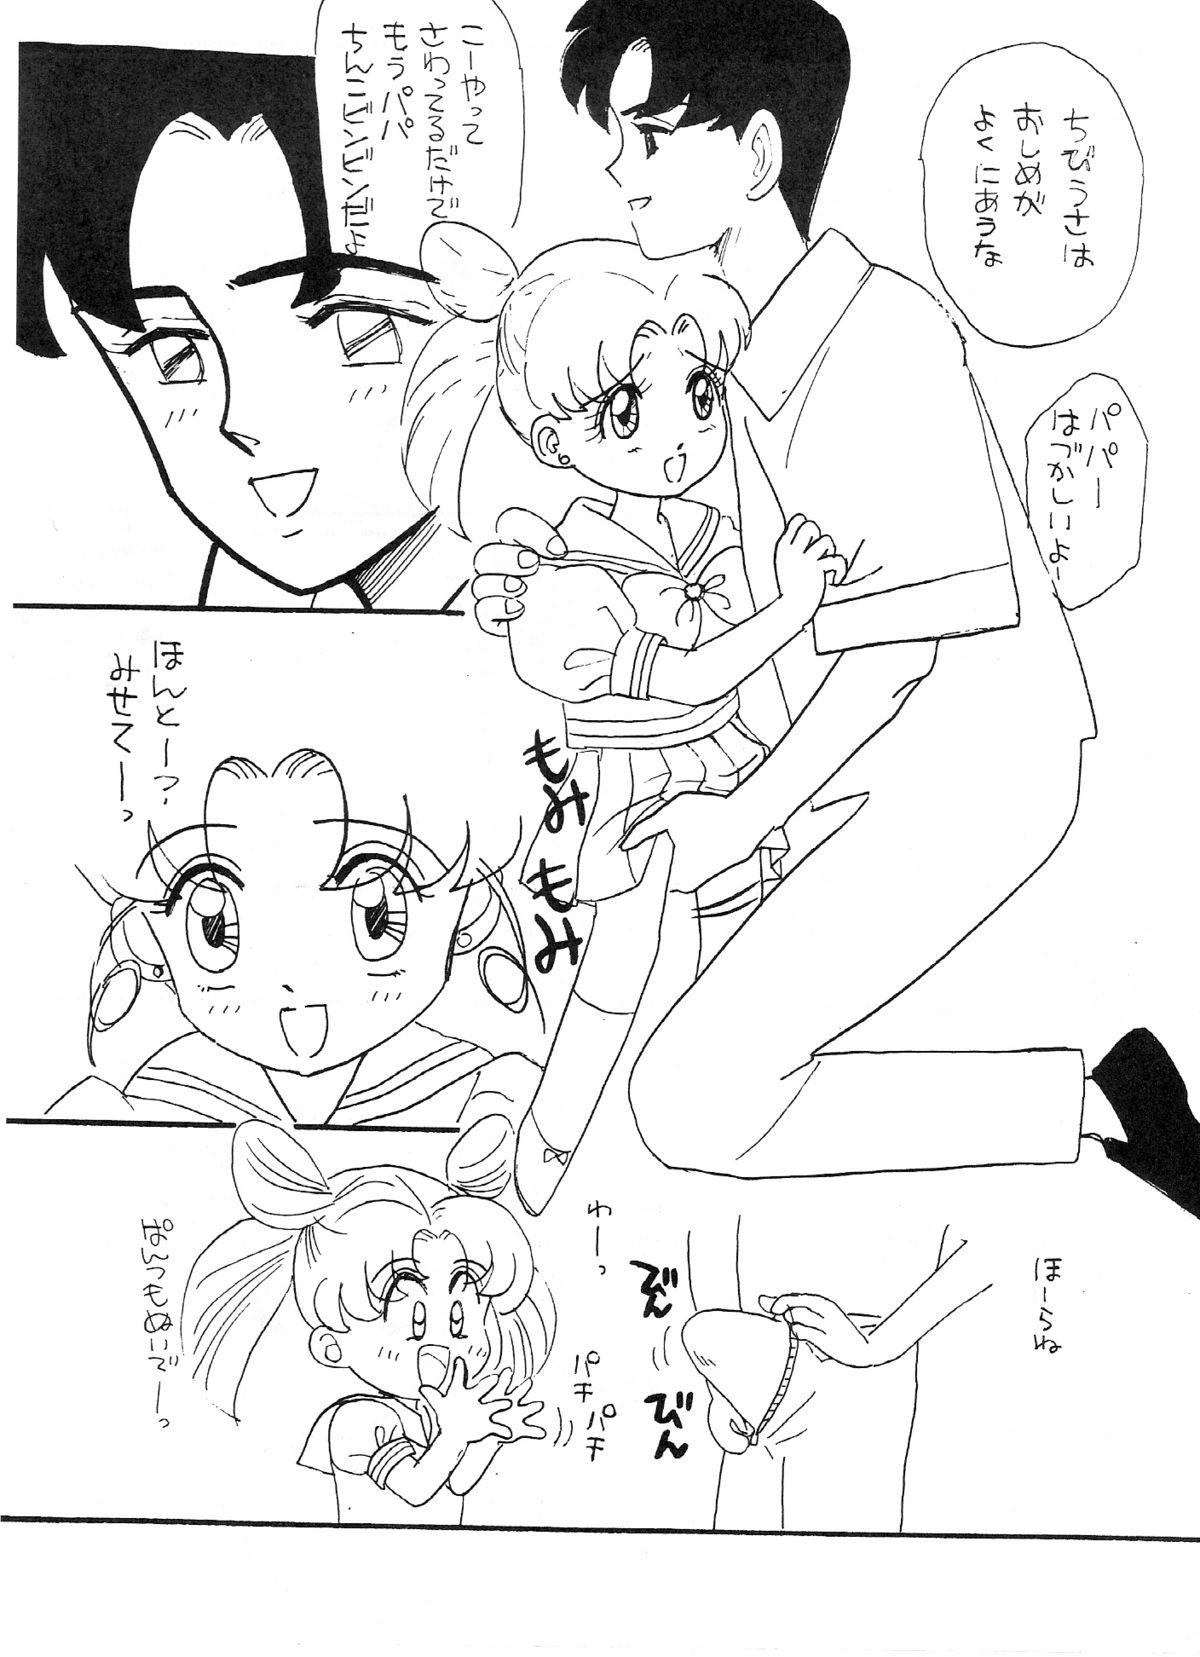 Sexteen SW-α - Sailor moon Deflowered - Page 8